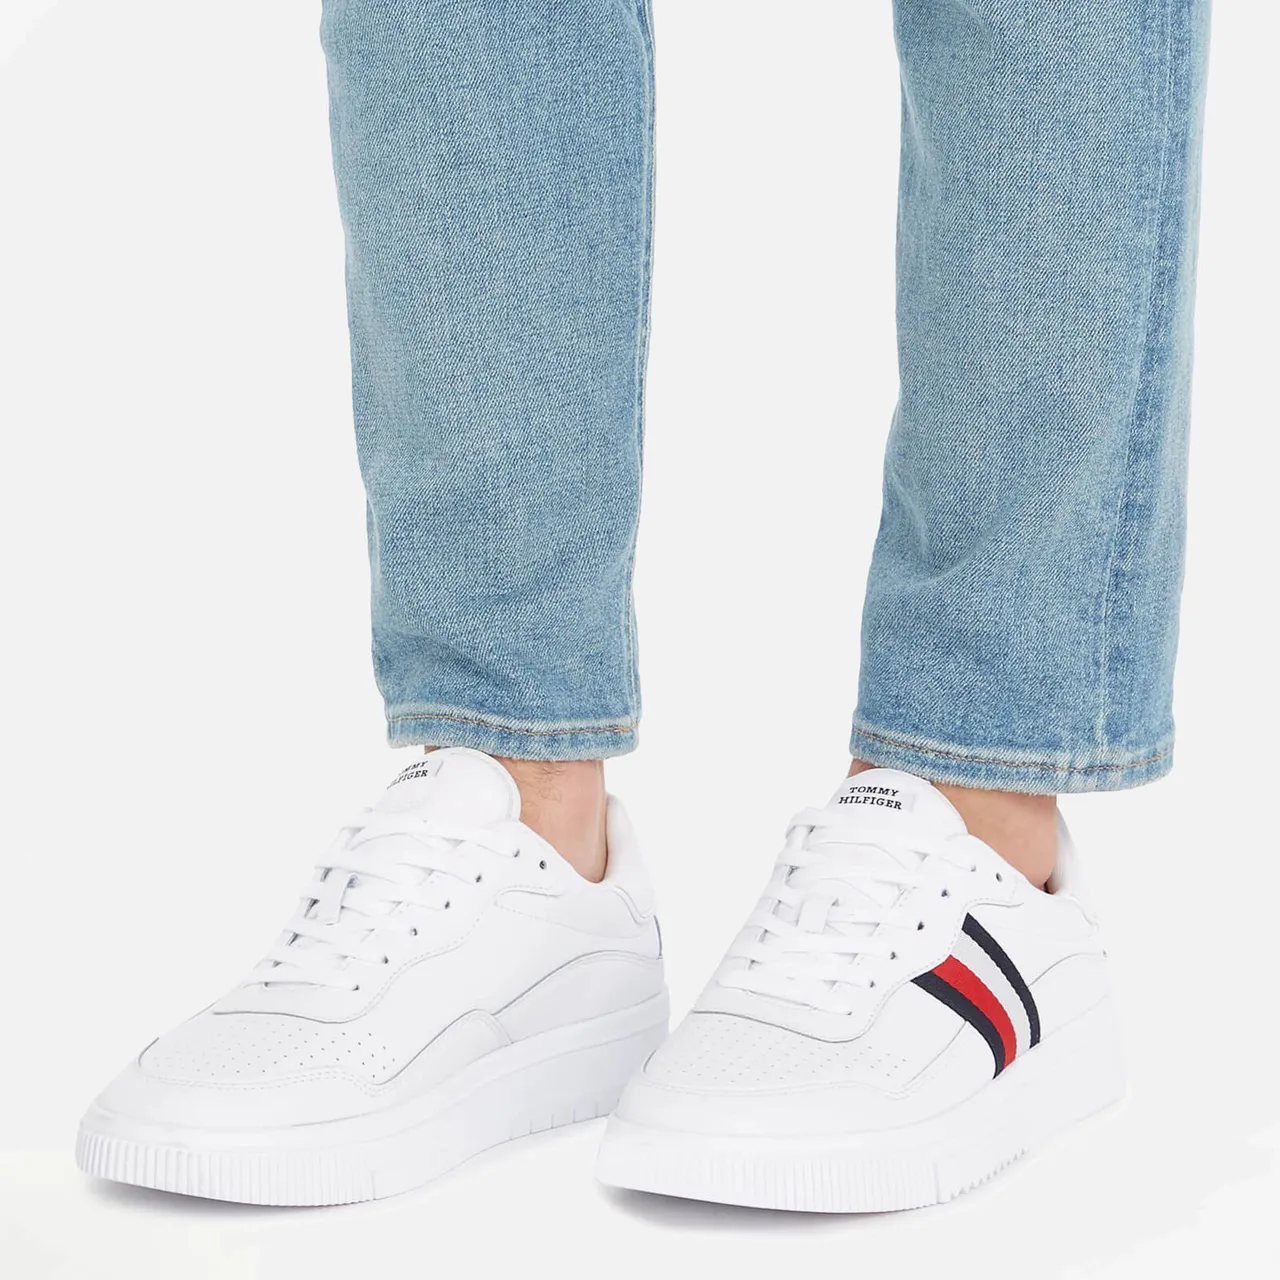 Tommy Hilfiger Men's Supercup Stripes Leather Trainers